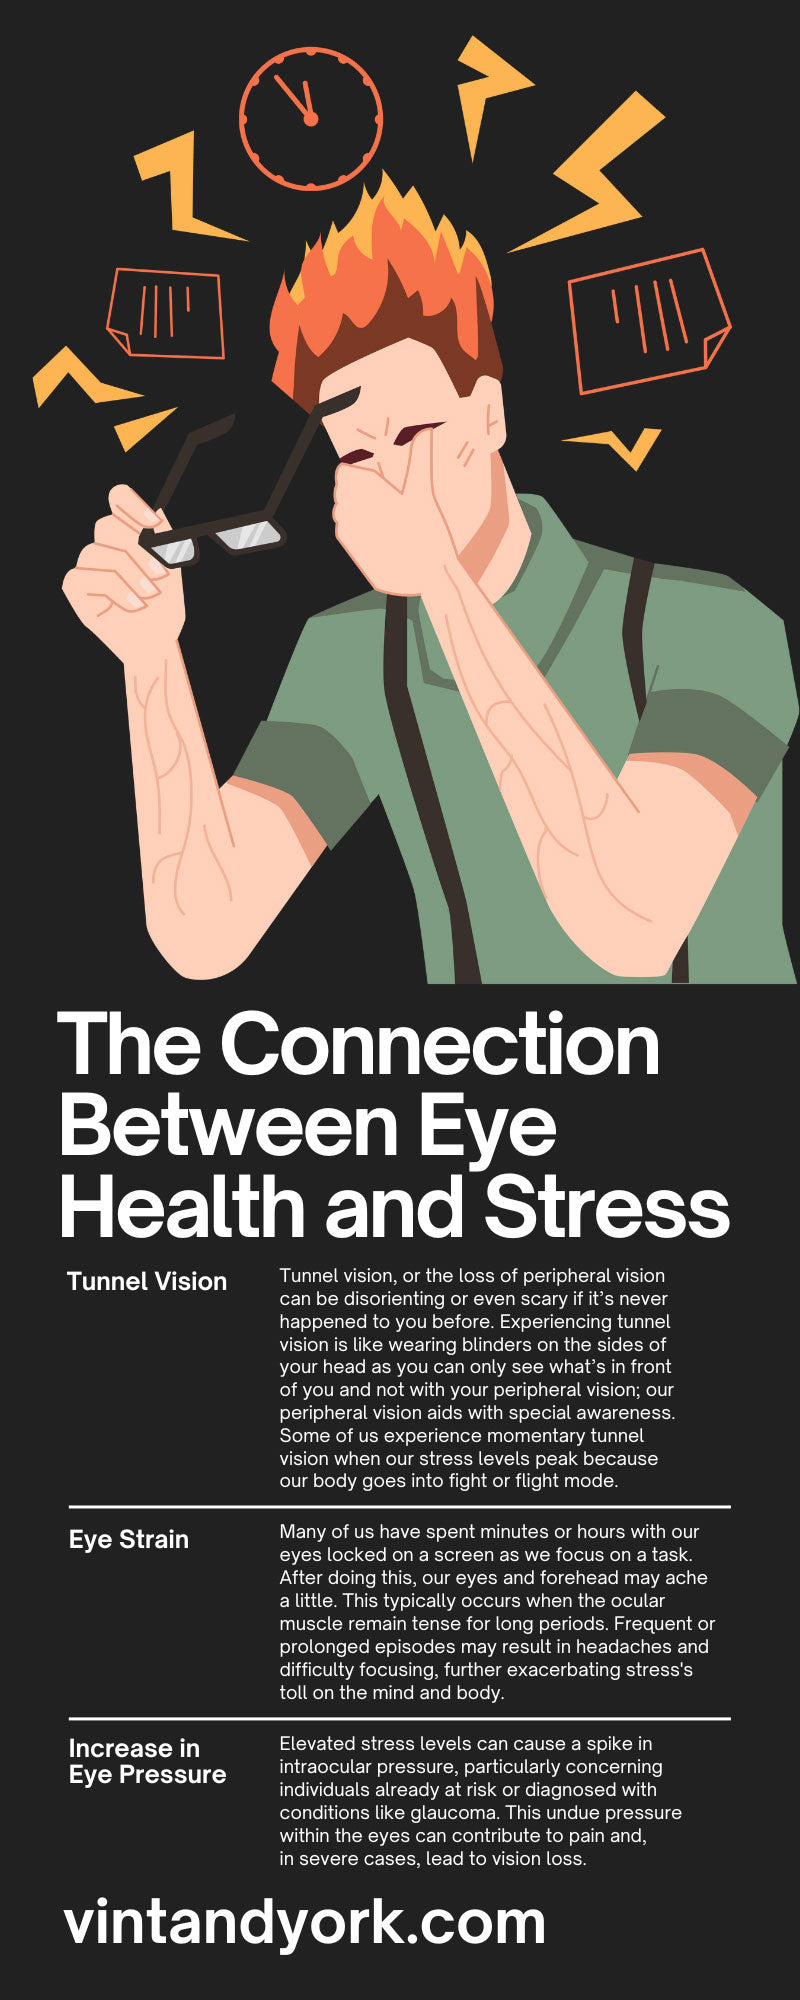 The Connection Between Eye Health and Stress